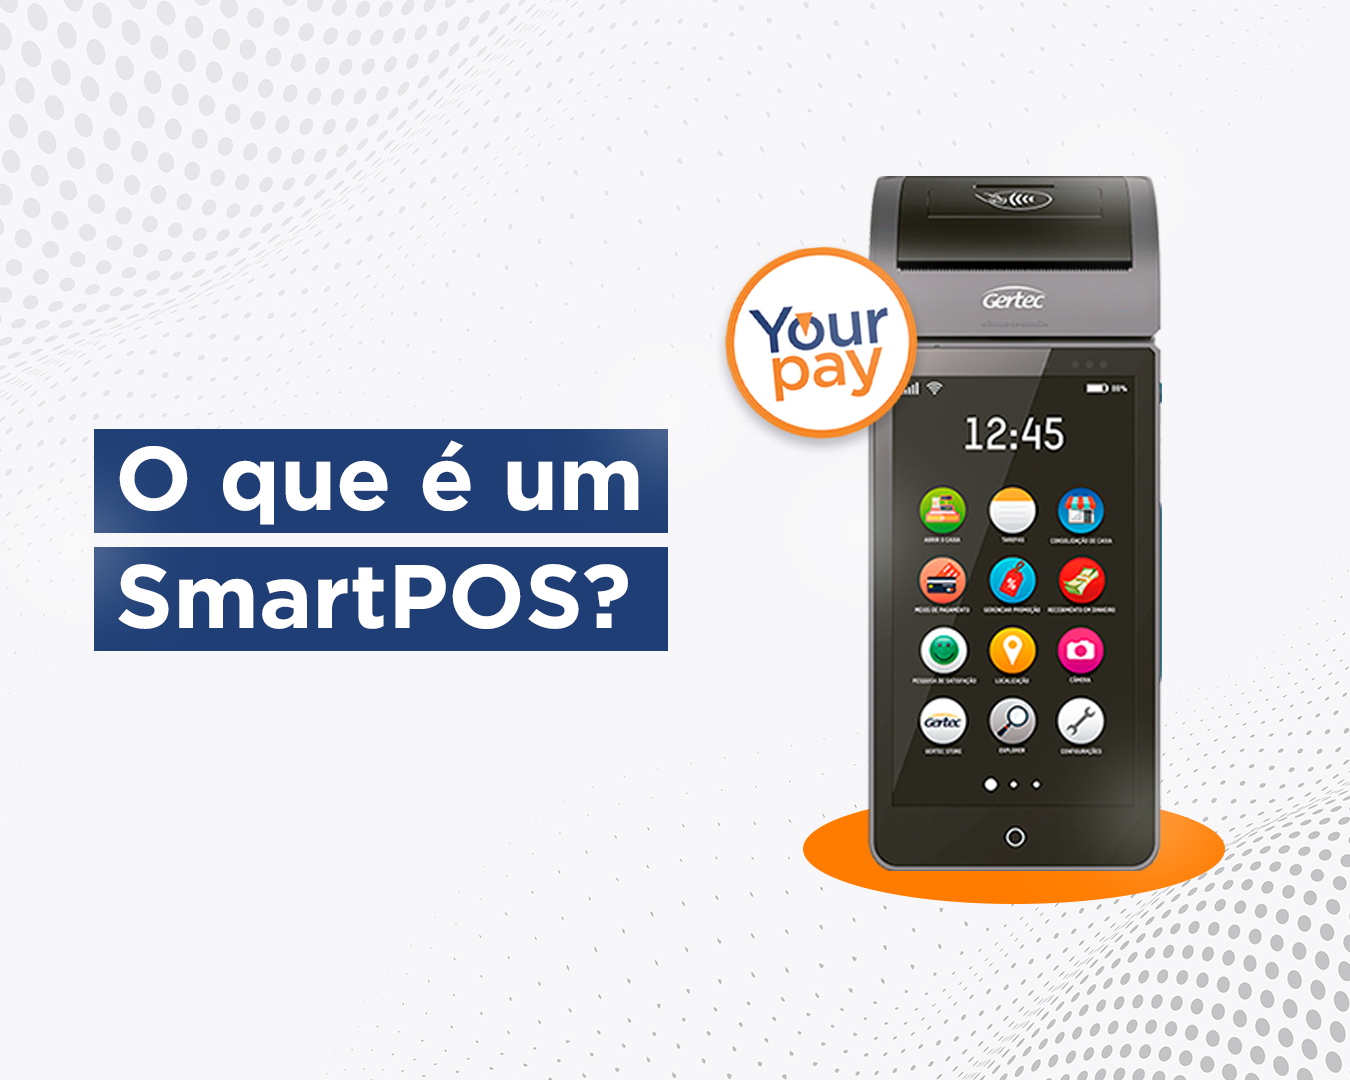 Smart POS, yourpay